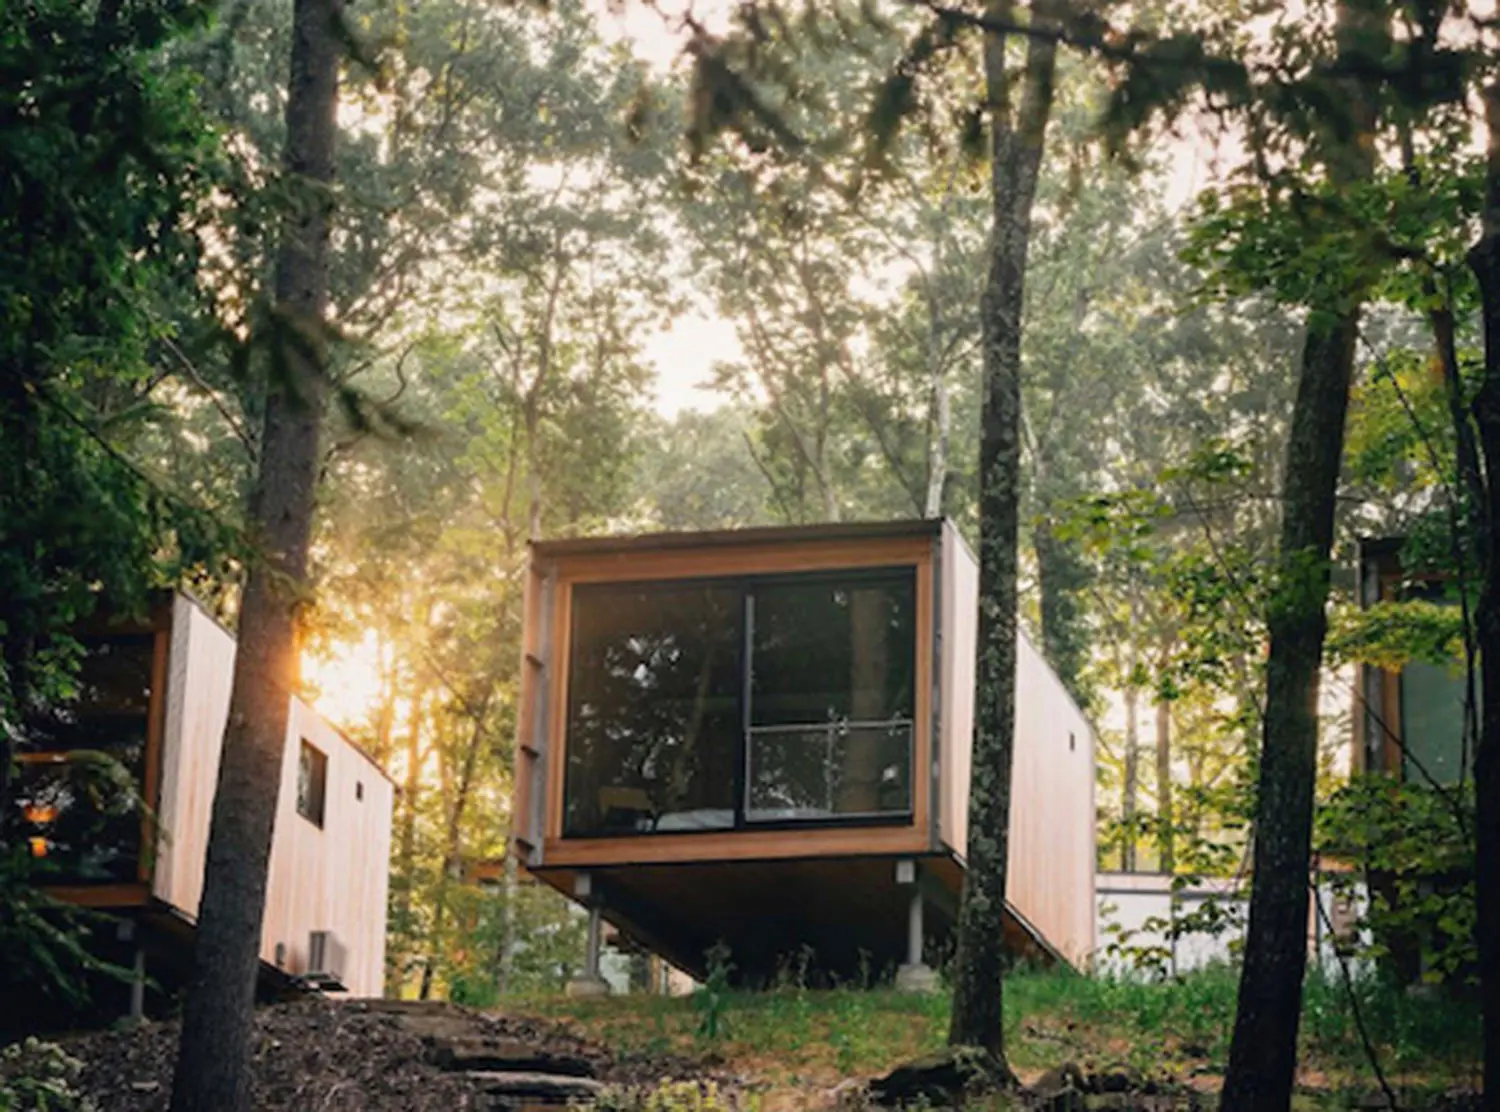 Piaule Each cabin sits on the edge of the land with their big windows facing the trees